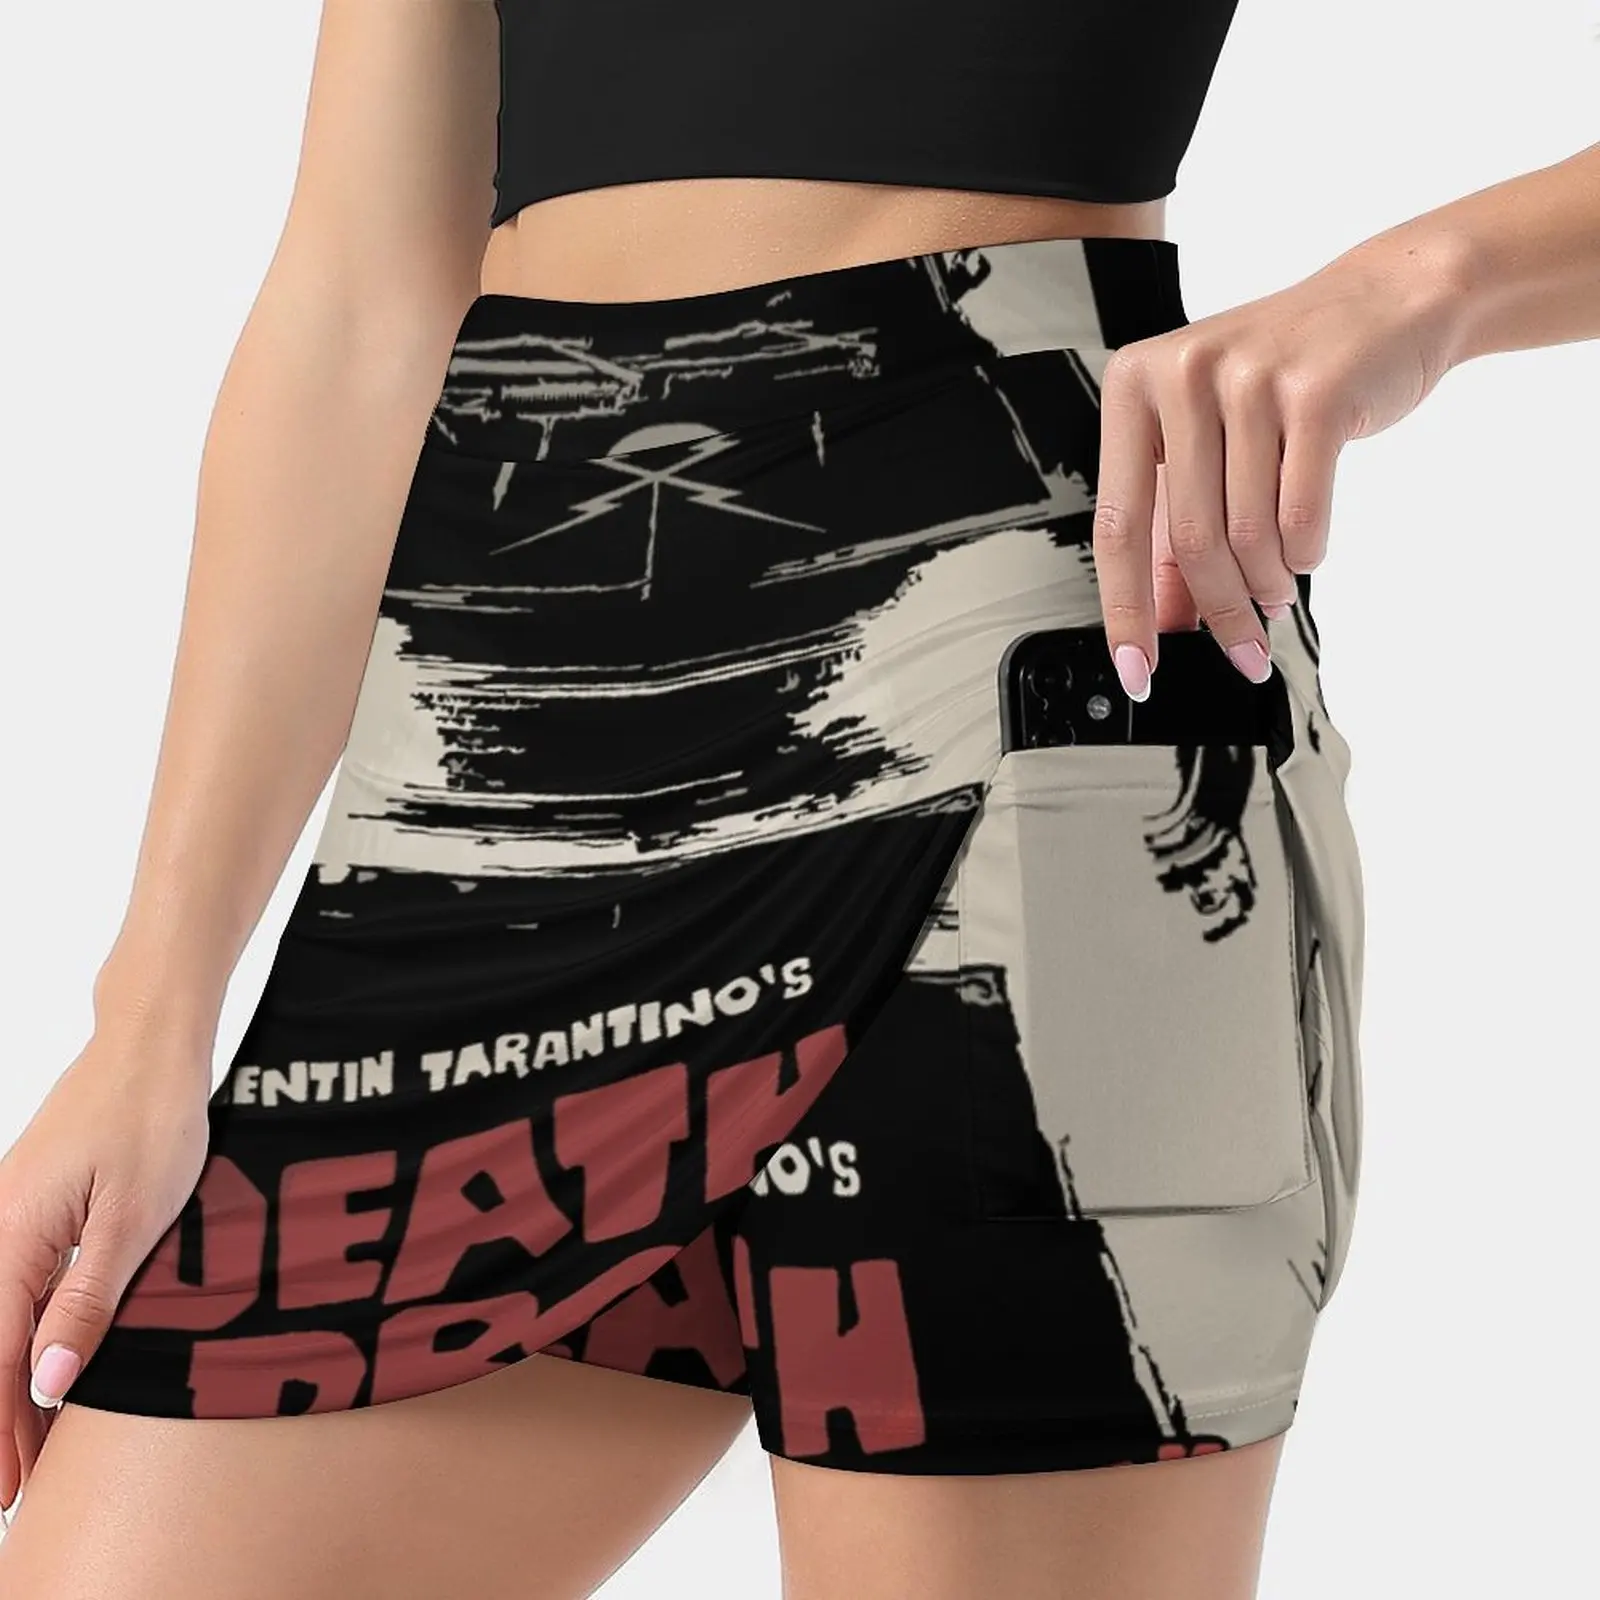 

Death Proof Summer Women'Sshorts Skirt 2 In 1 Fitness Yoga Skirt Tennis Skirts Death Proof Deathproof Grindhouse Ladies Short